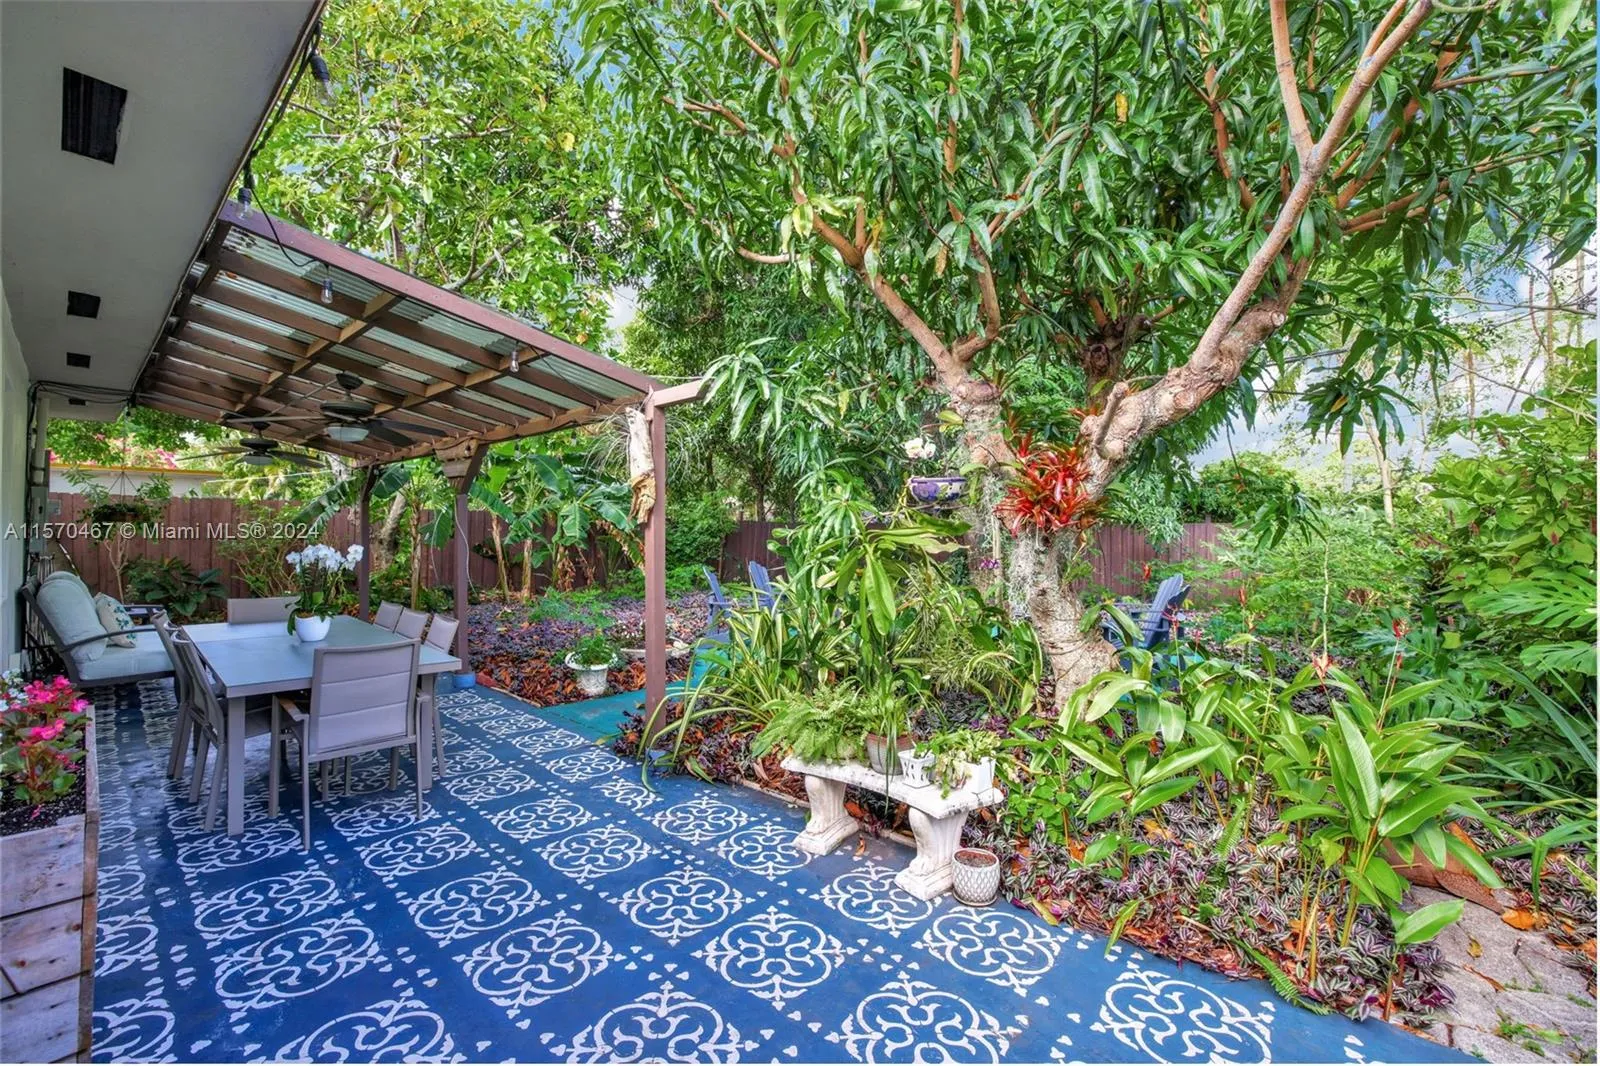 Beautiful covered patio overlooking lush garden with mango, avocado, papaya, banana, nase berry / sapodilla and other decorative plants, including orchids and jasmine